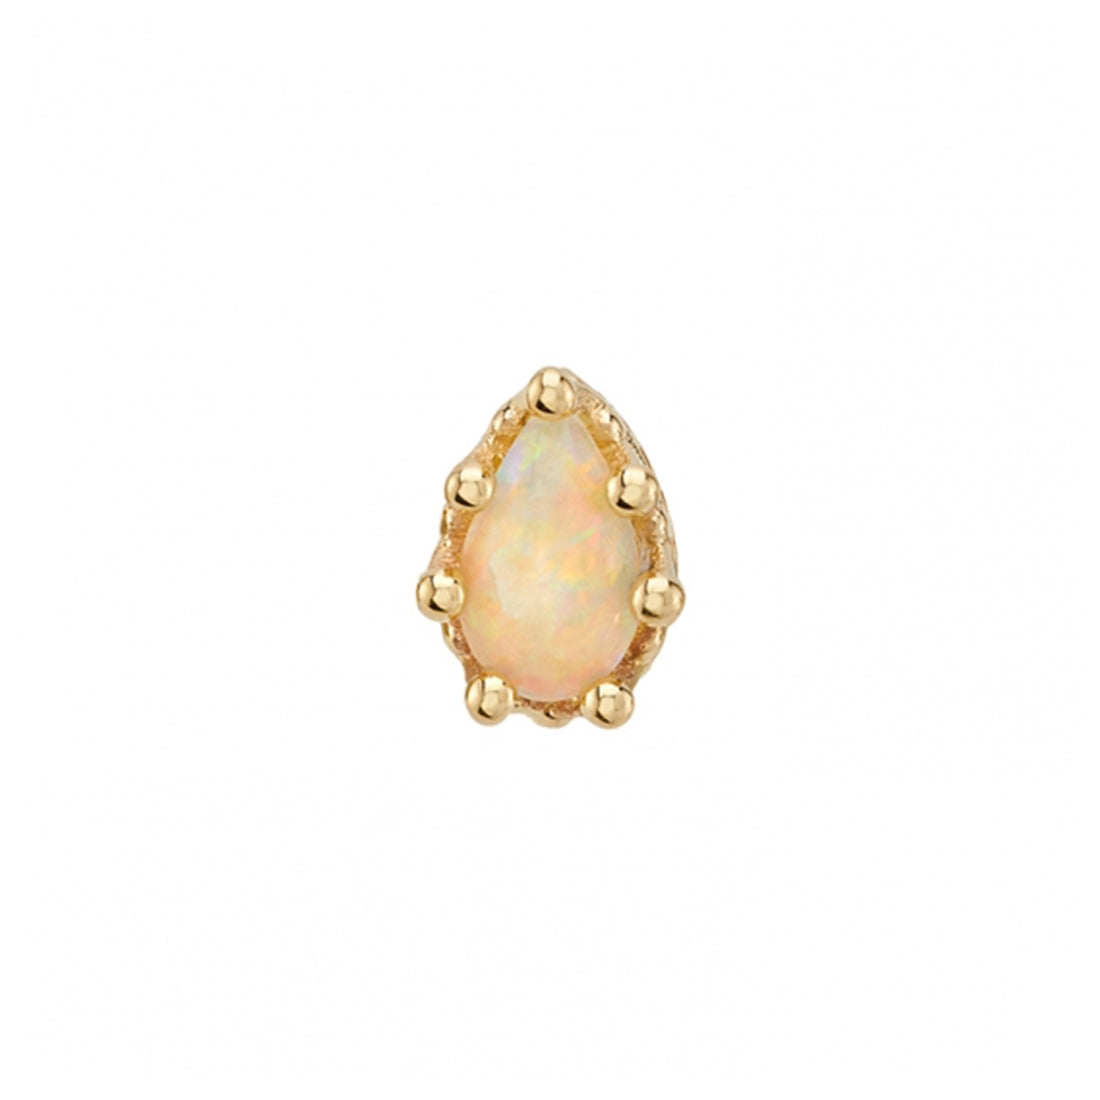 BVLA - CROWN PRONG PEAR (5mm x 3mm Gem) - 14KT SOLID GOLD - THREADED END